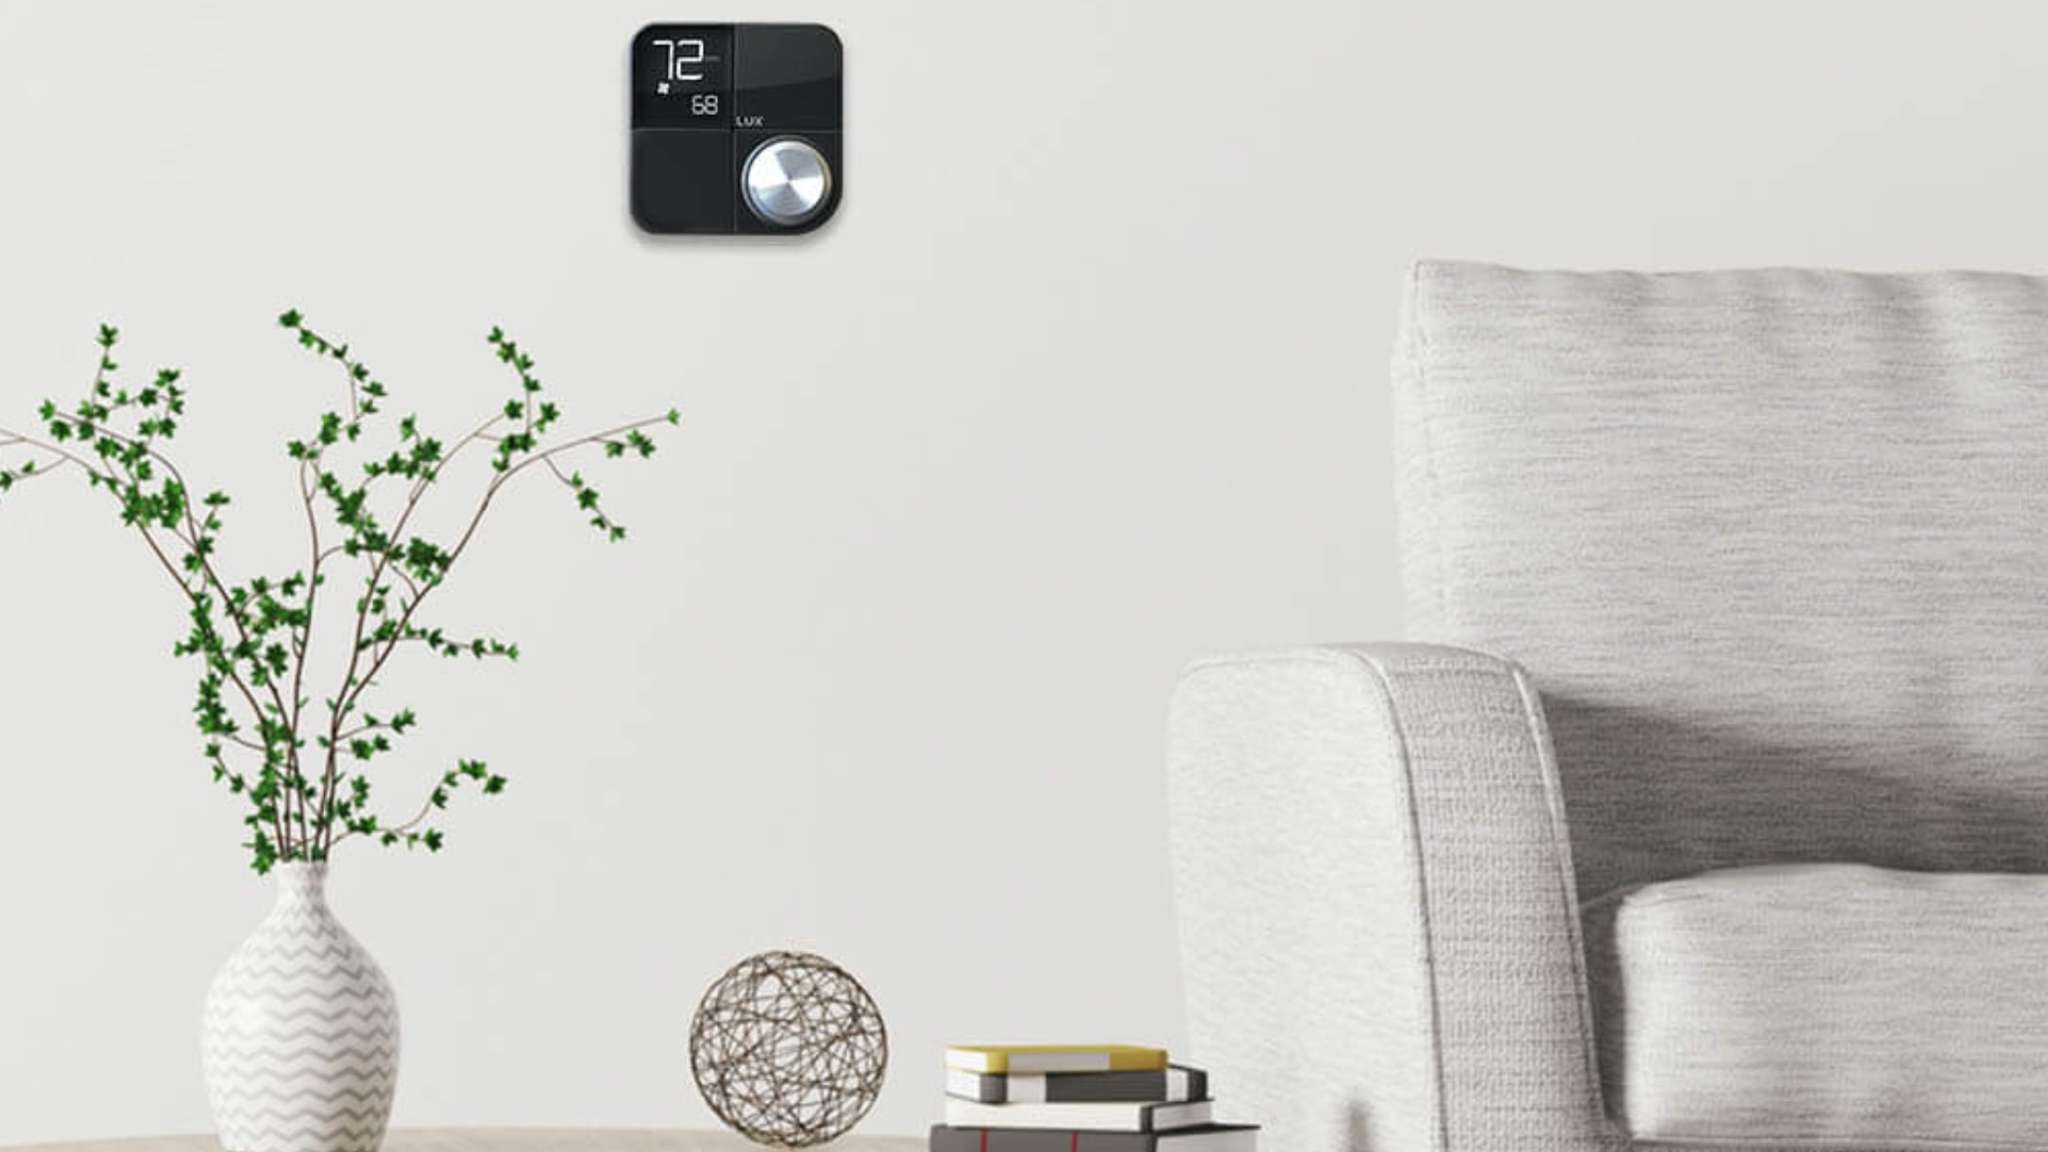 Lux Kono Smart Thermostat in a living room setting